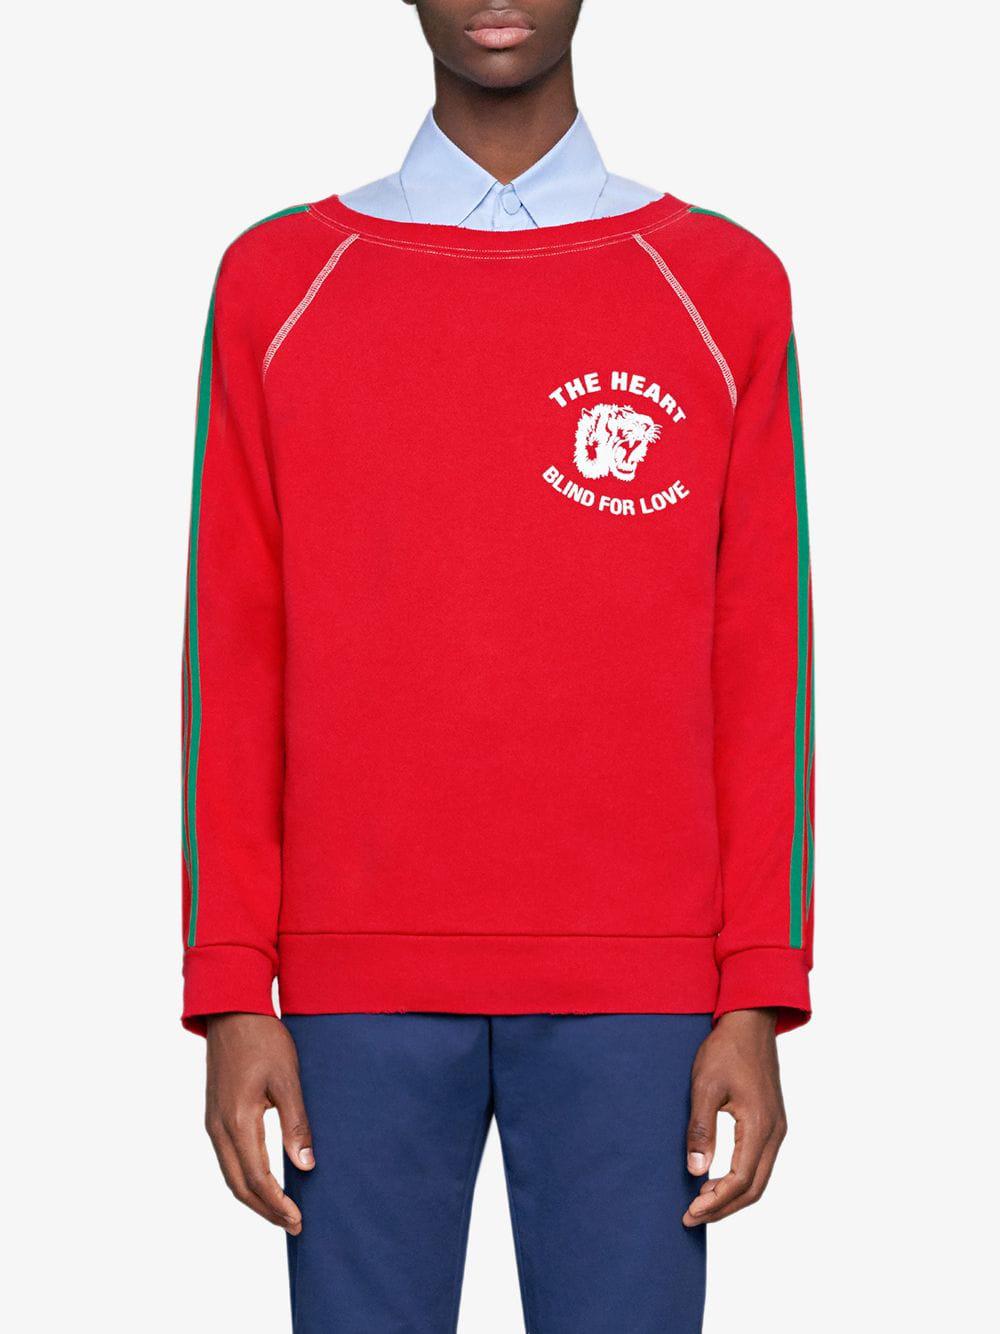 Gucci Spiritismo Sweatshirt in Red for - Lyst